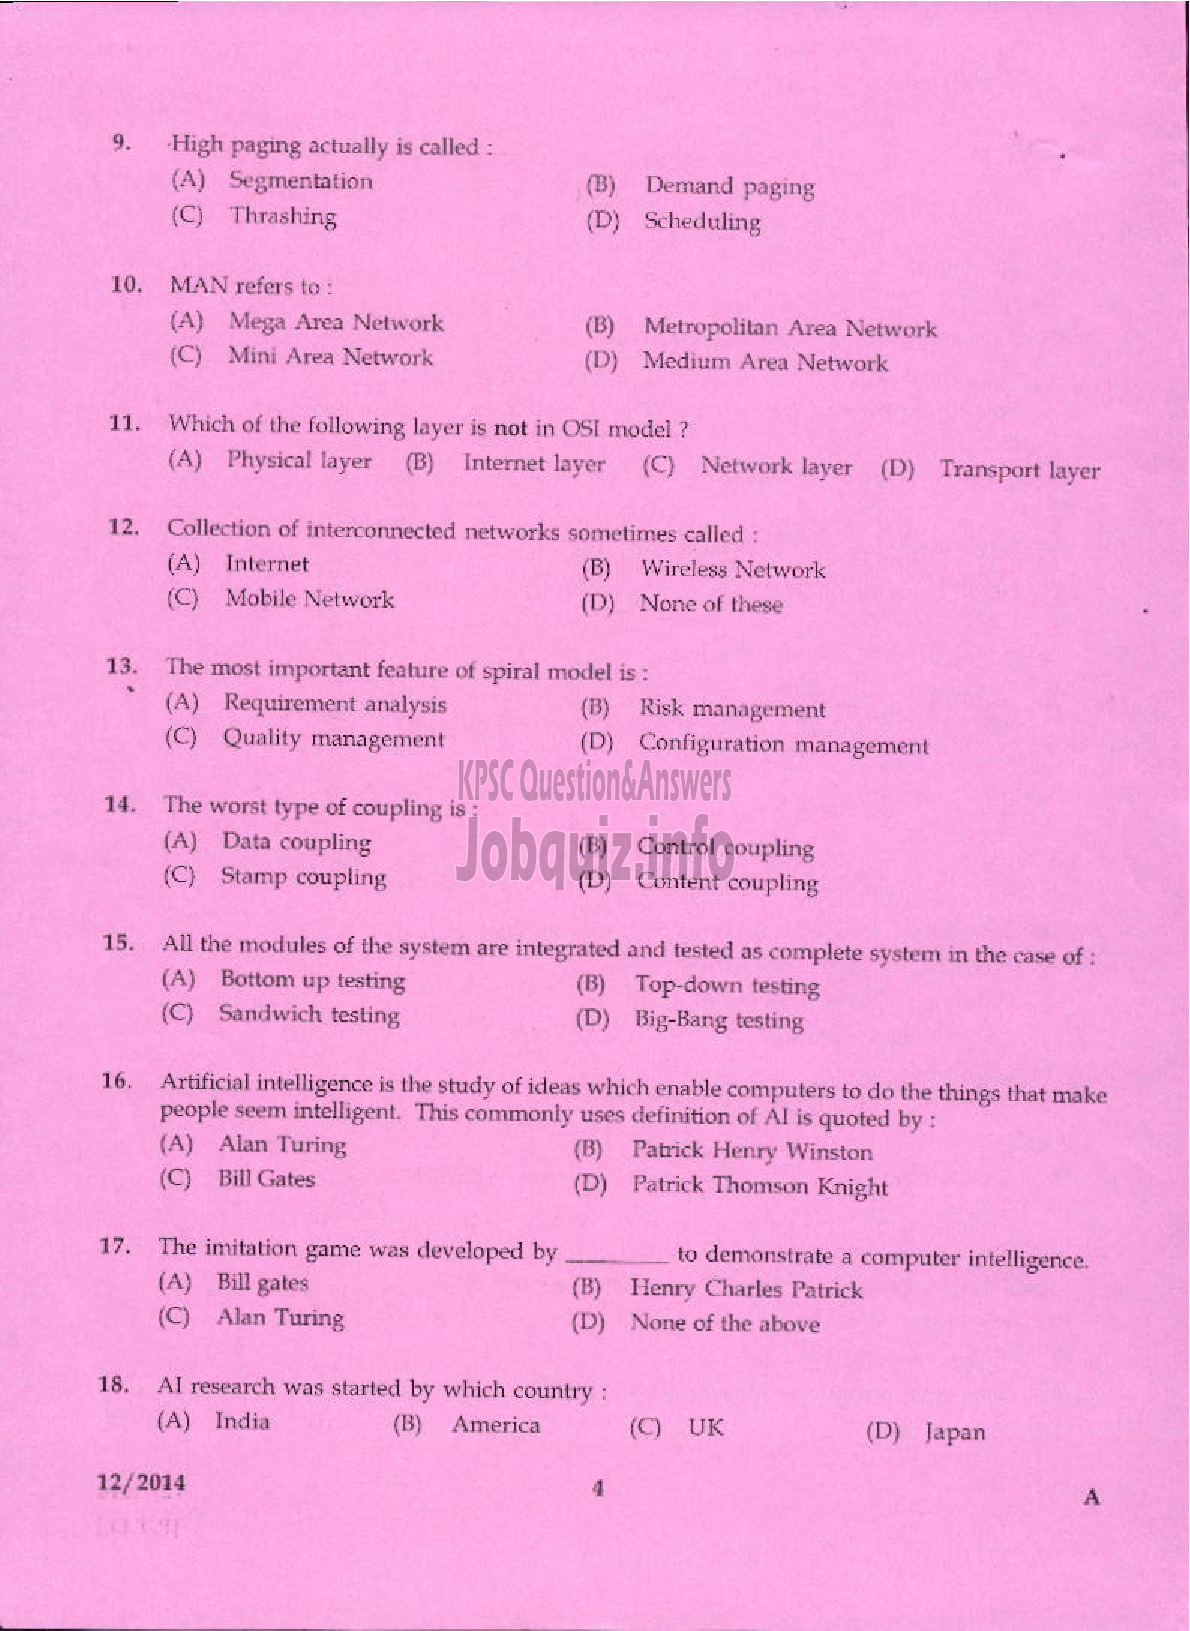 Kerala PSC Question Paper - VOCATIONAL INSTRUCTOR IN COMPUTER APPLICATION VHSE-2